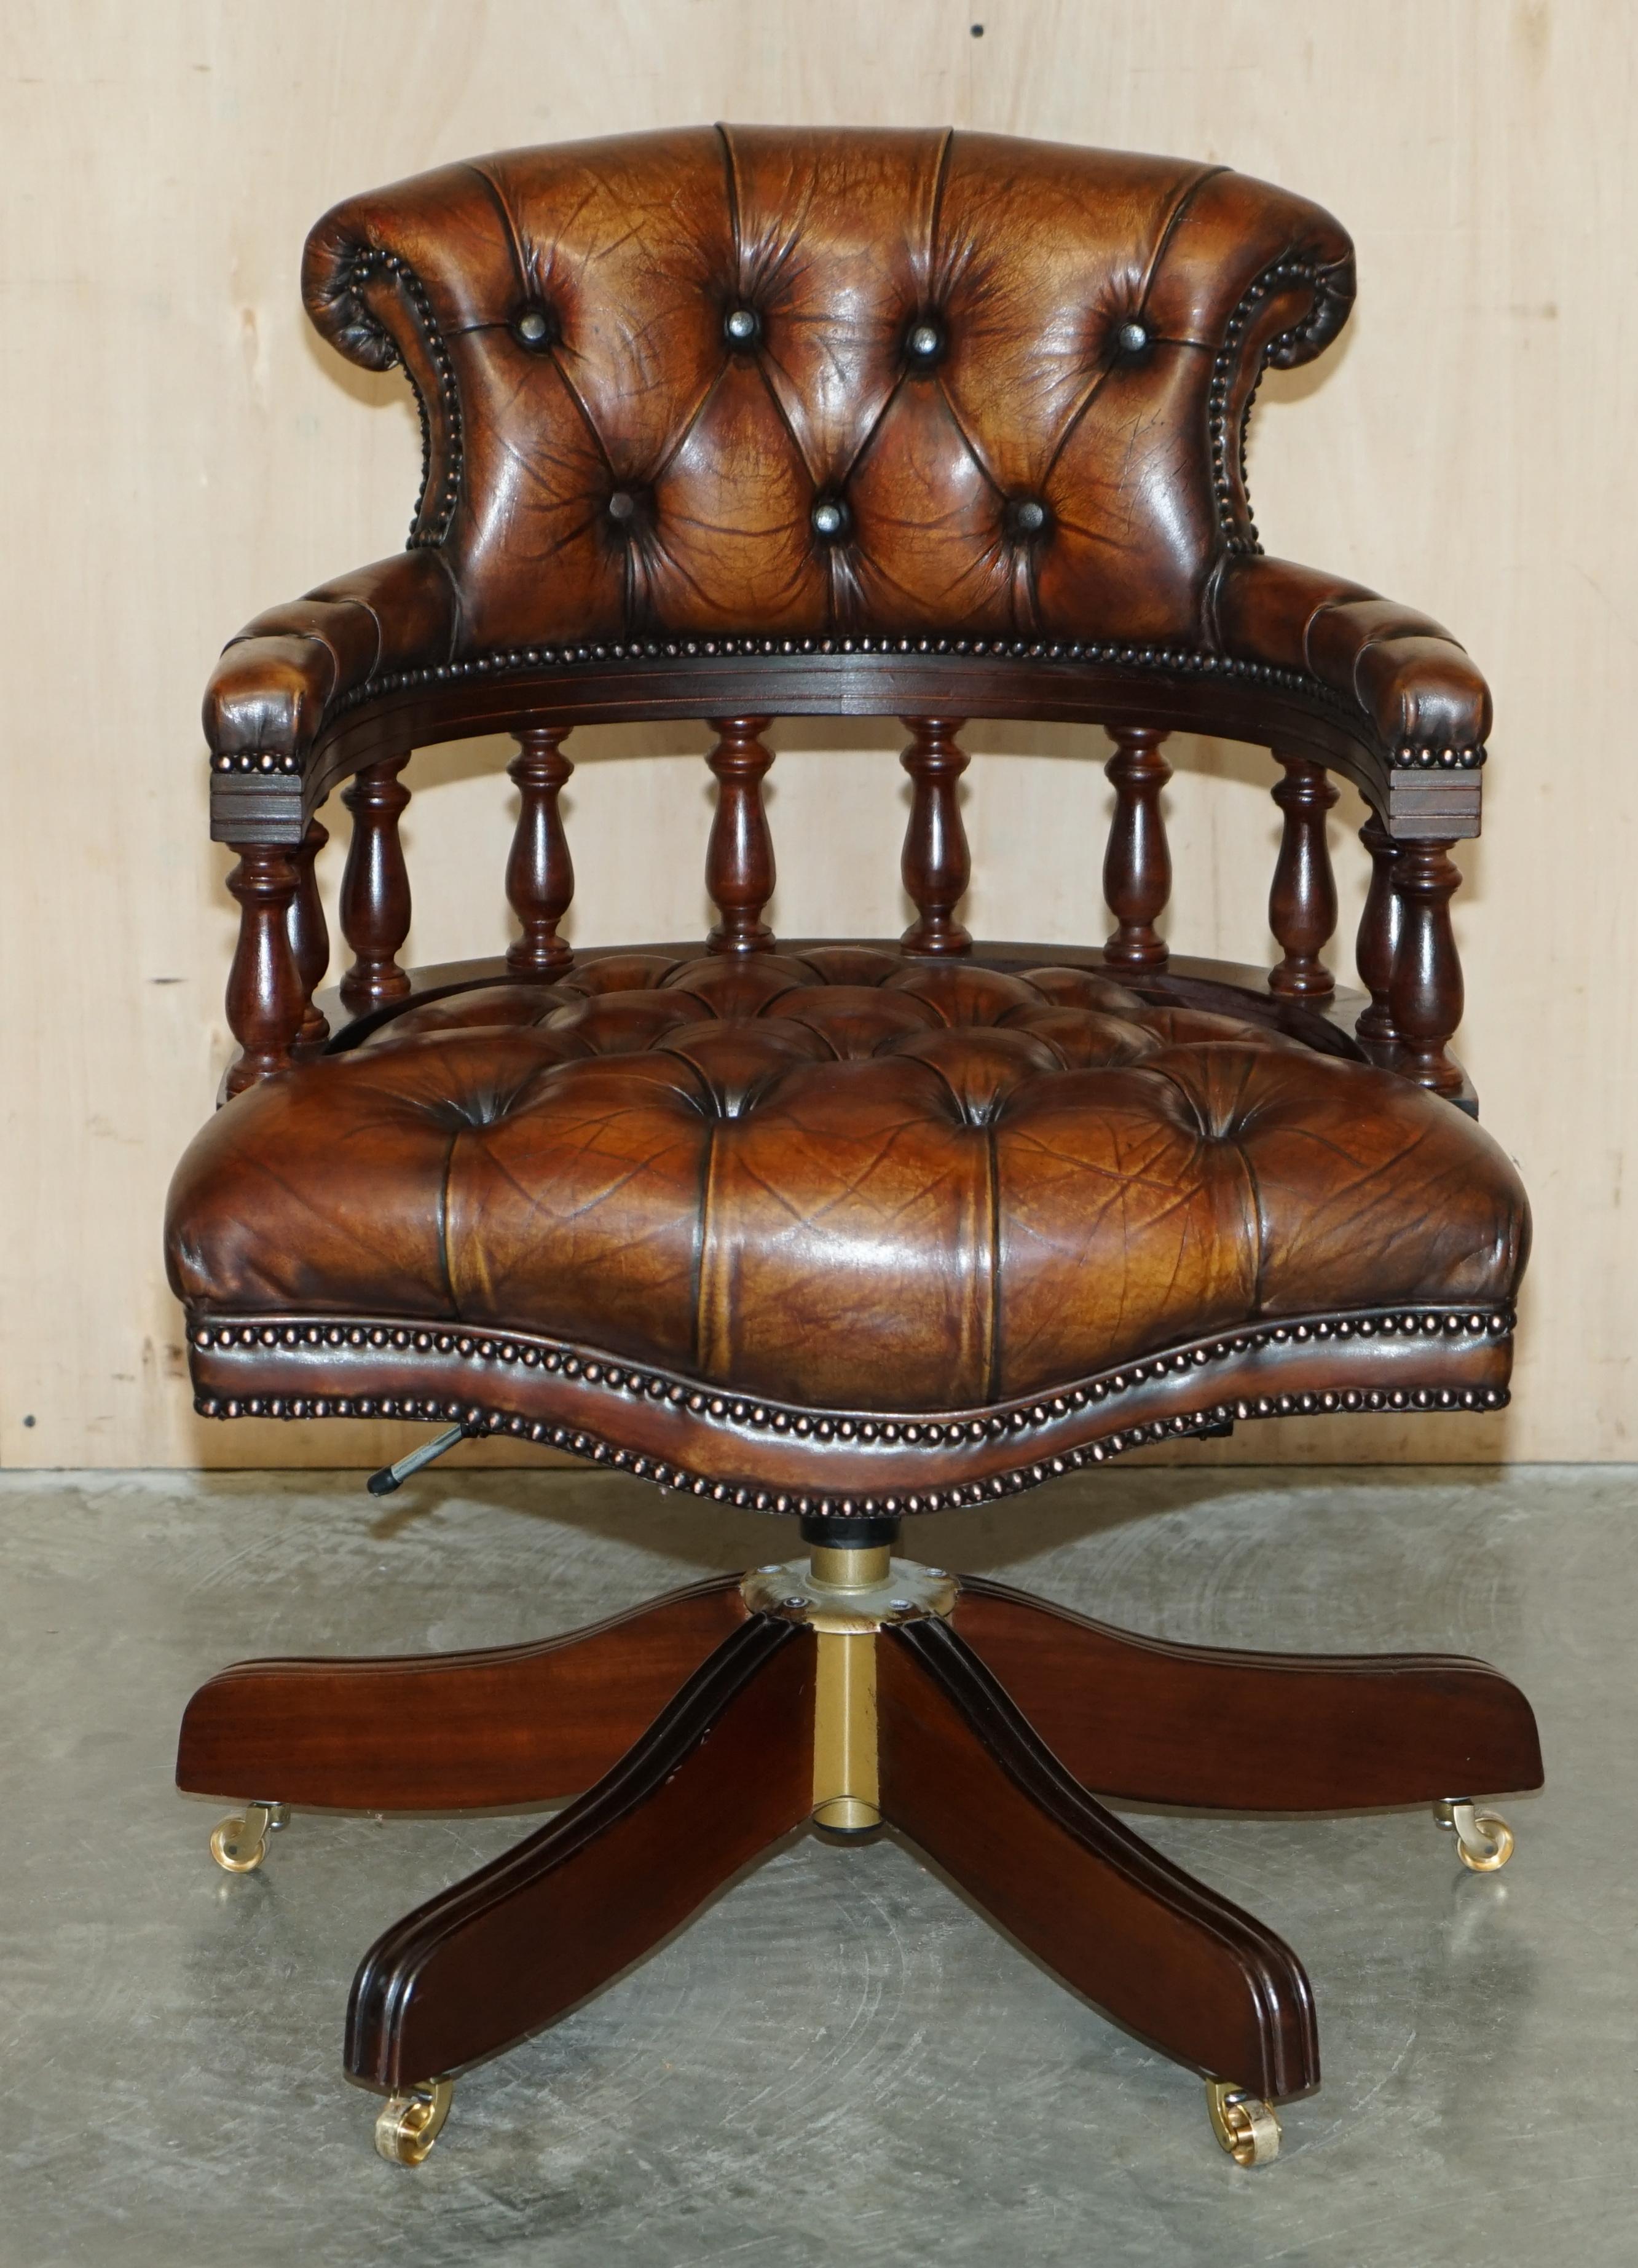 We are delighted to offer for sale this lovely fully restored original oak framed vintage hand dyed Chesterfield cigar brown leather directors chair with solid brass English castors.

A very good looking well made and comfortable directors chair,